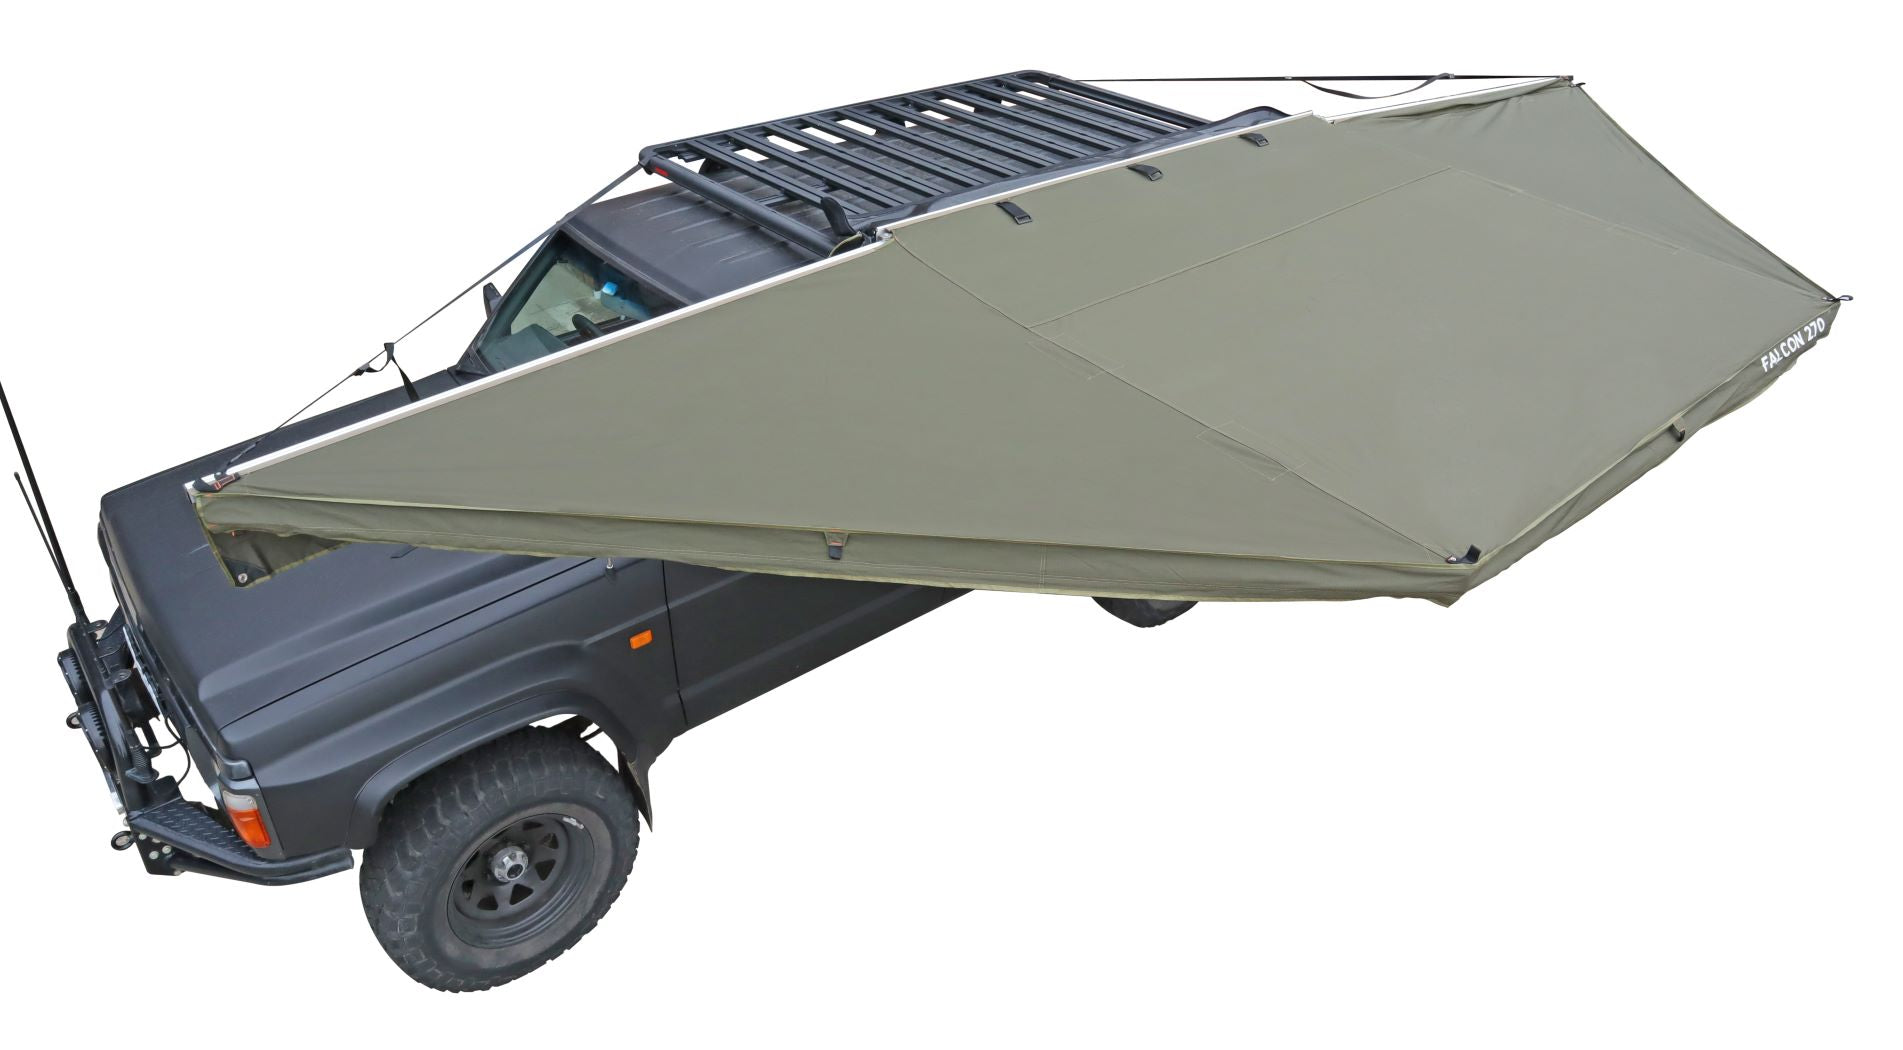 23ZERO Peregrine 180° Awning with LST